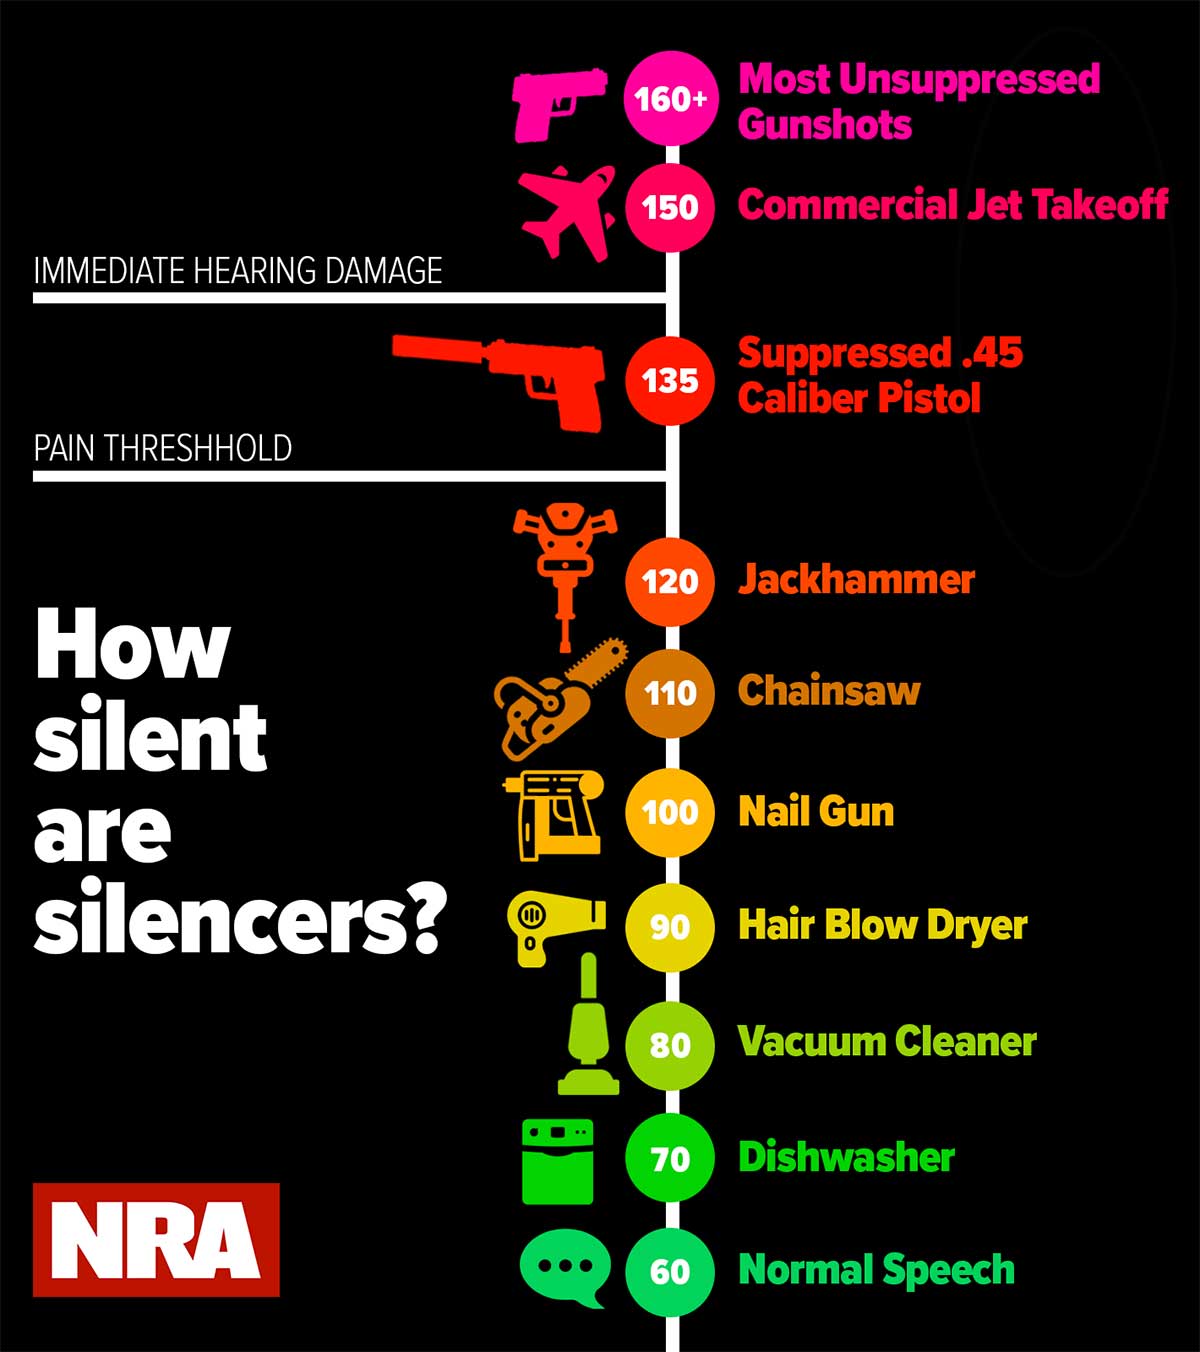 NRA-Silencer-And-Suppressed-Pistol-Facts